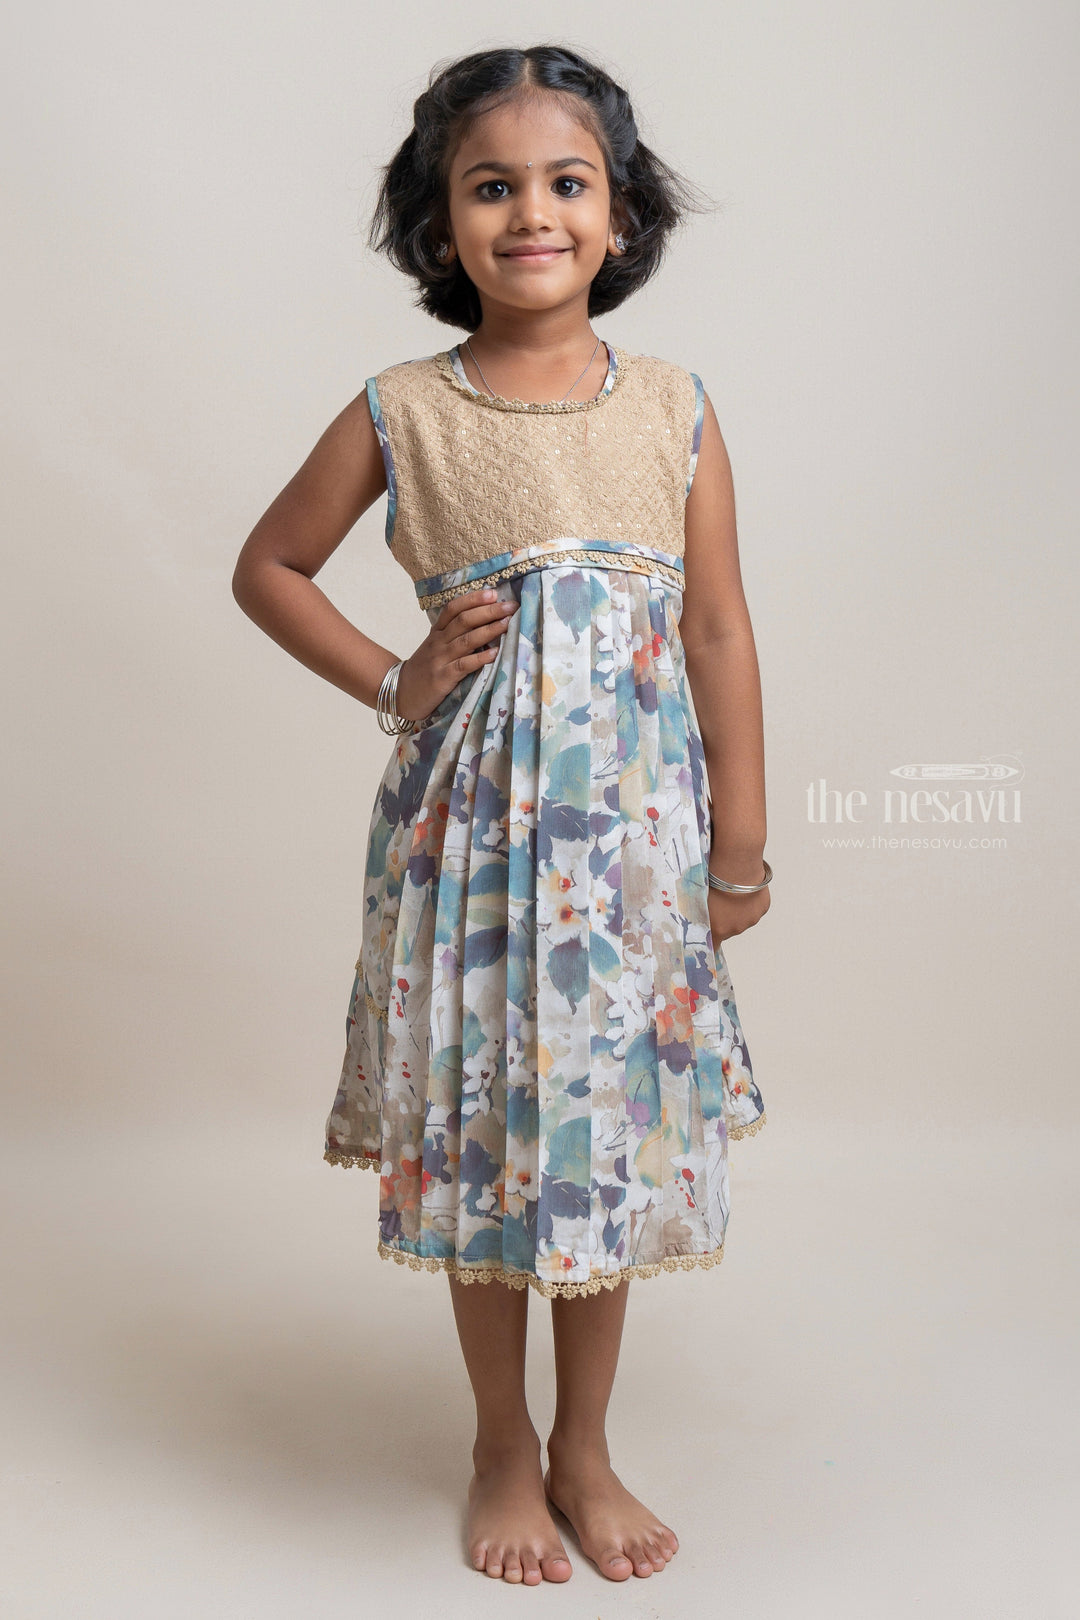 The Nesavu Girls Cotton Frock Gorgeous Multi-Colored Floral Printed Soft Cotton Daily Wear Frock For Young Girls Nesavu 16 (1Y) / multicolor / Viscose GFC927B-16 Fashionable Cotton Frock for Girls | New Arrivals | The Nesavu